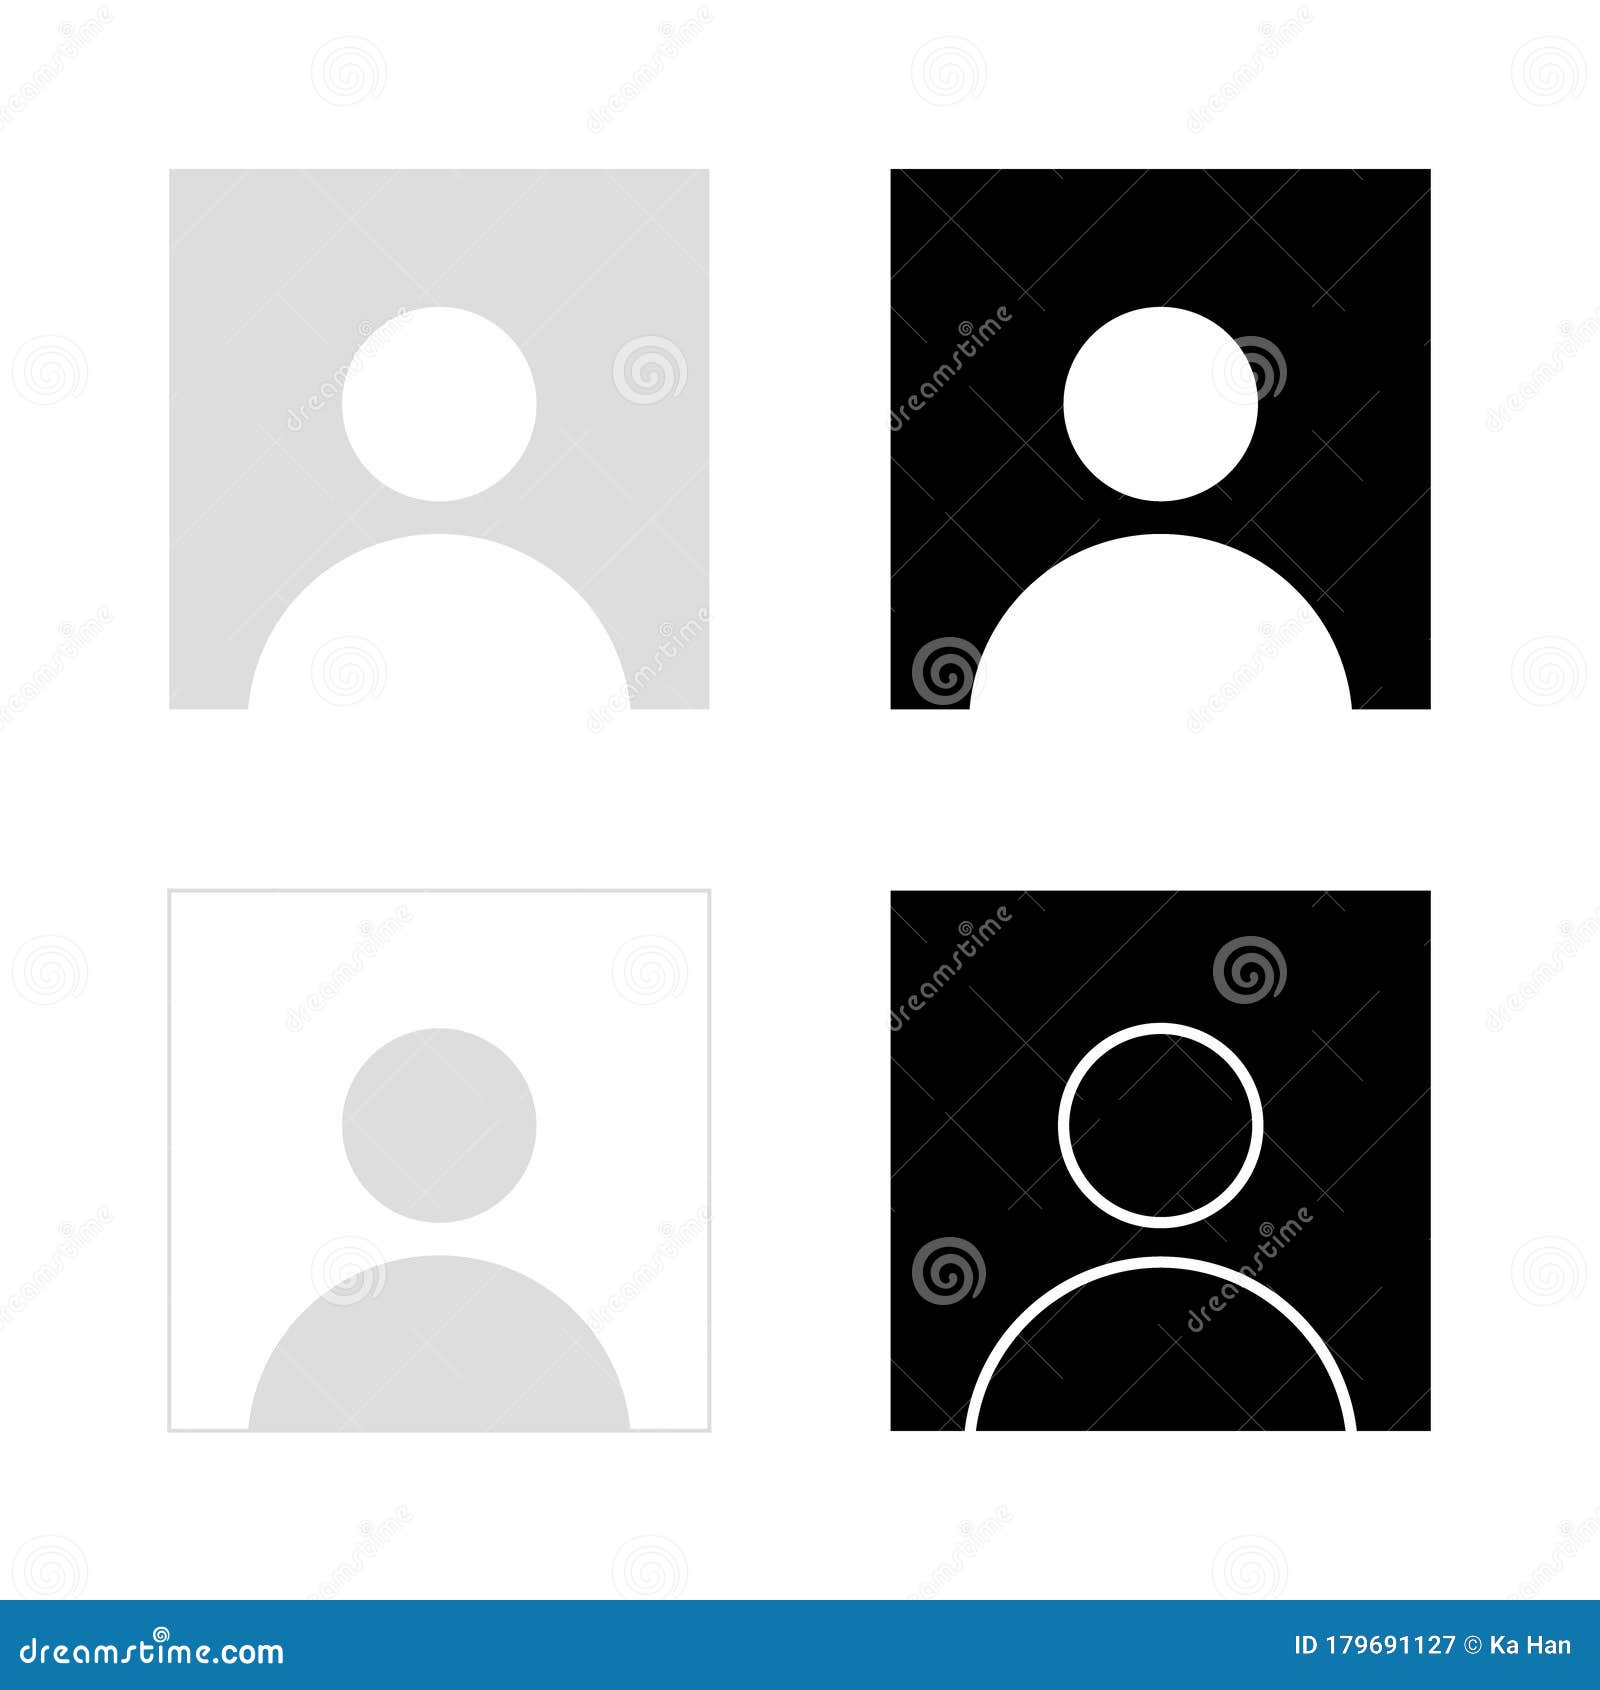 Avatar - empty Vector Icons free download in SVG, PNG Format